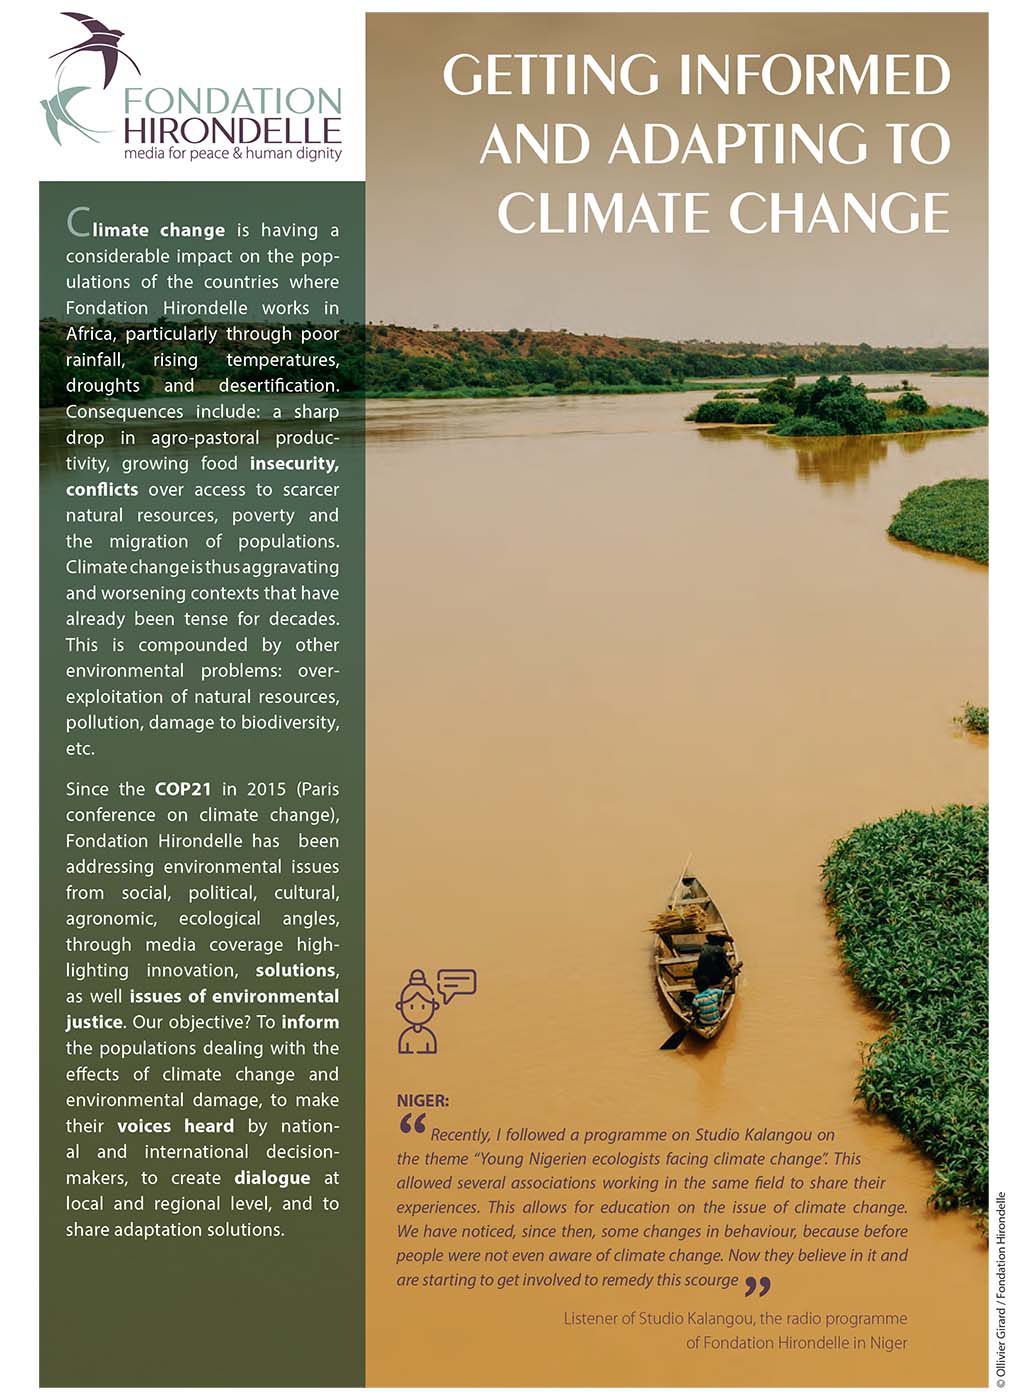 Getting informed and adapting to climate change - Download our Flyer